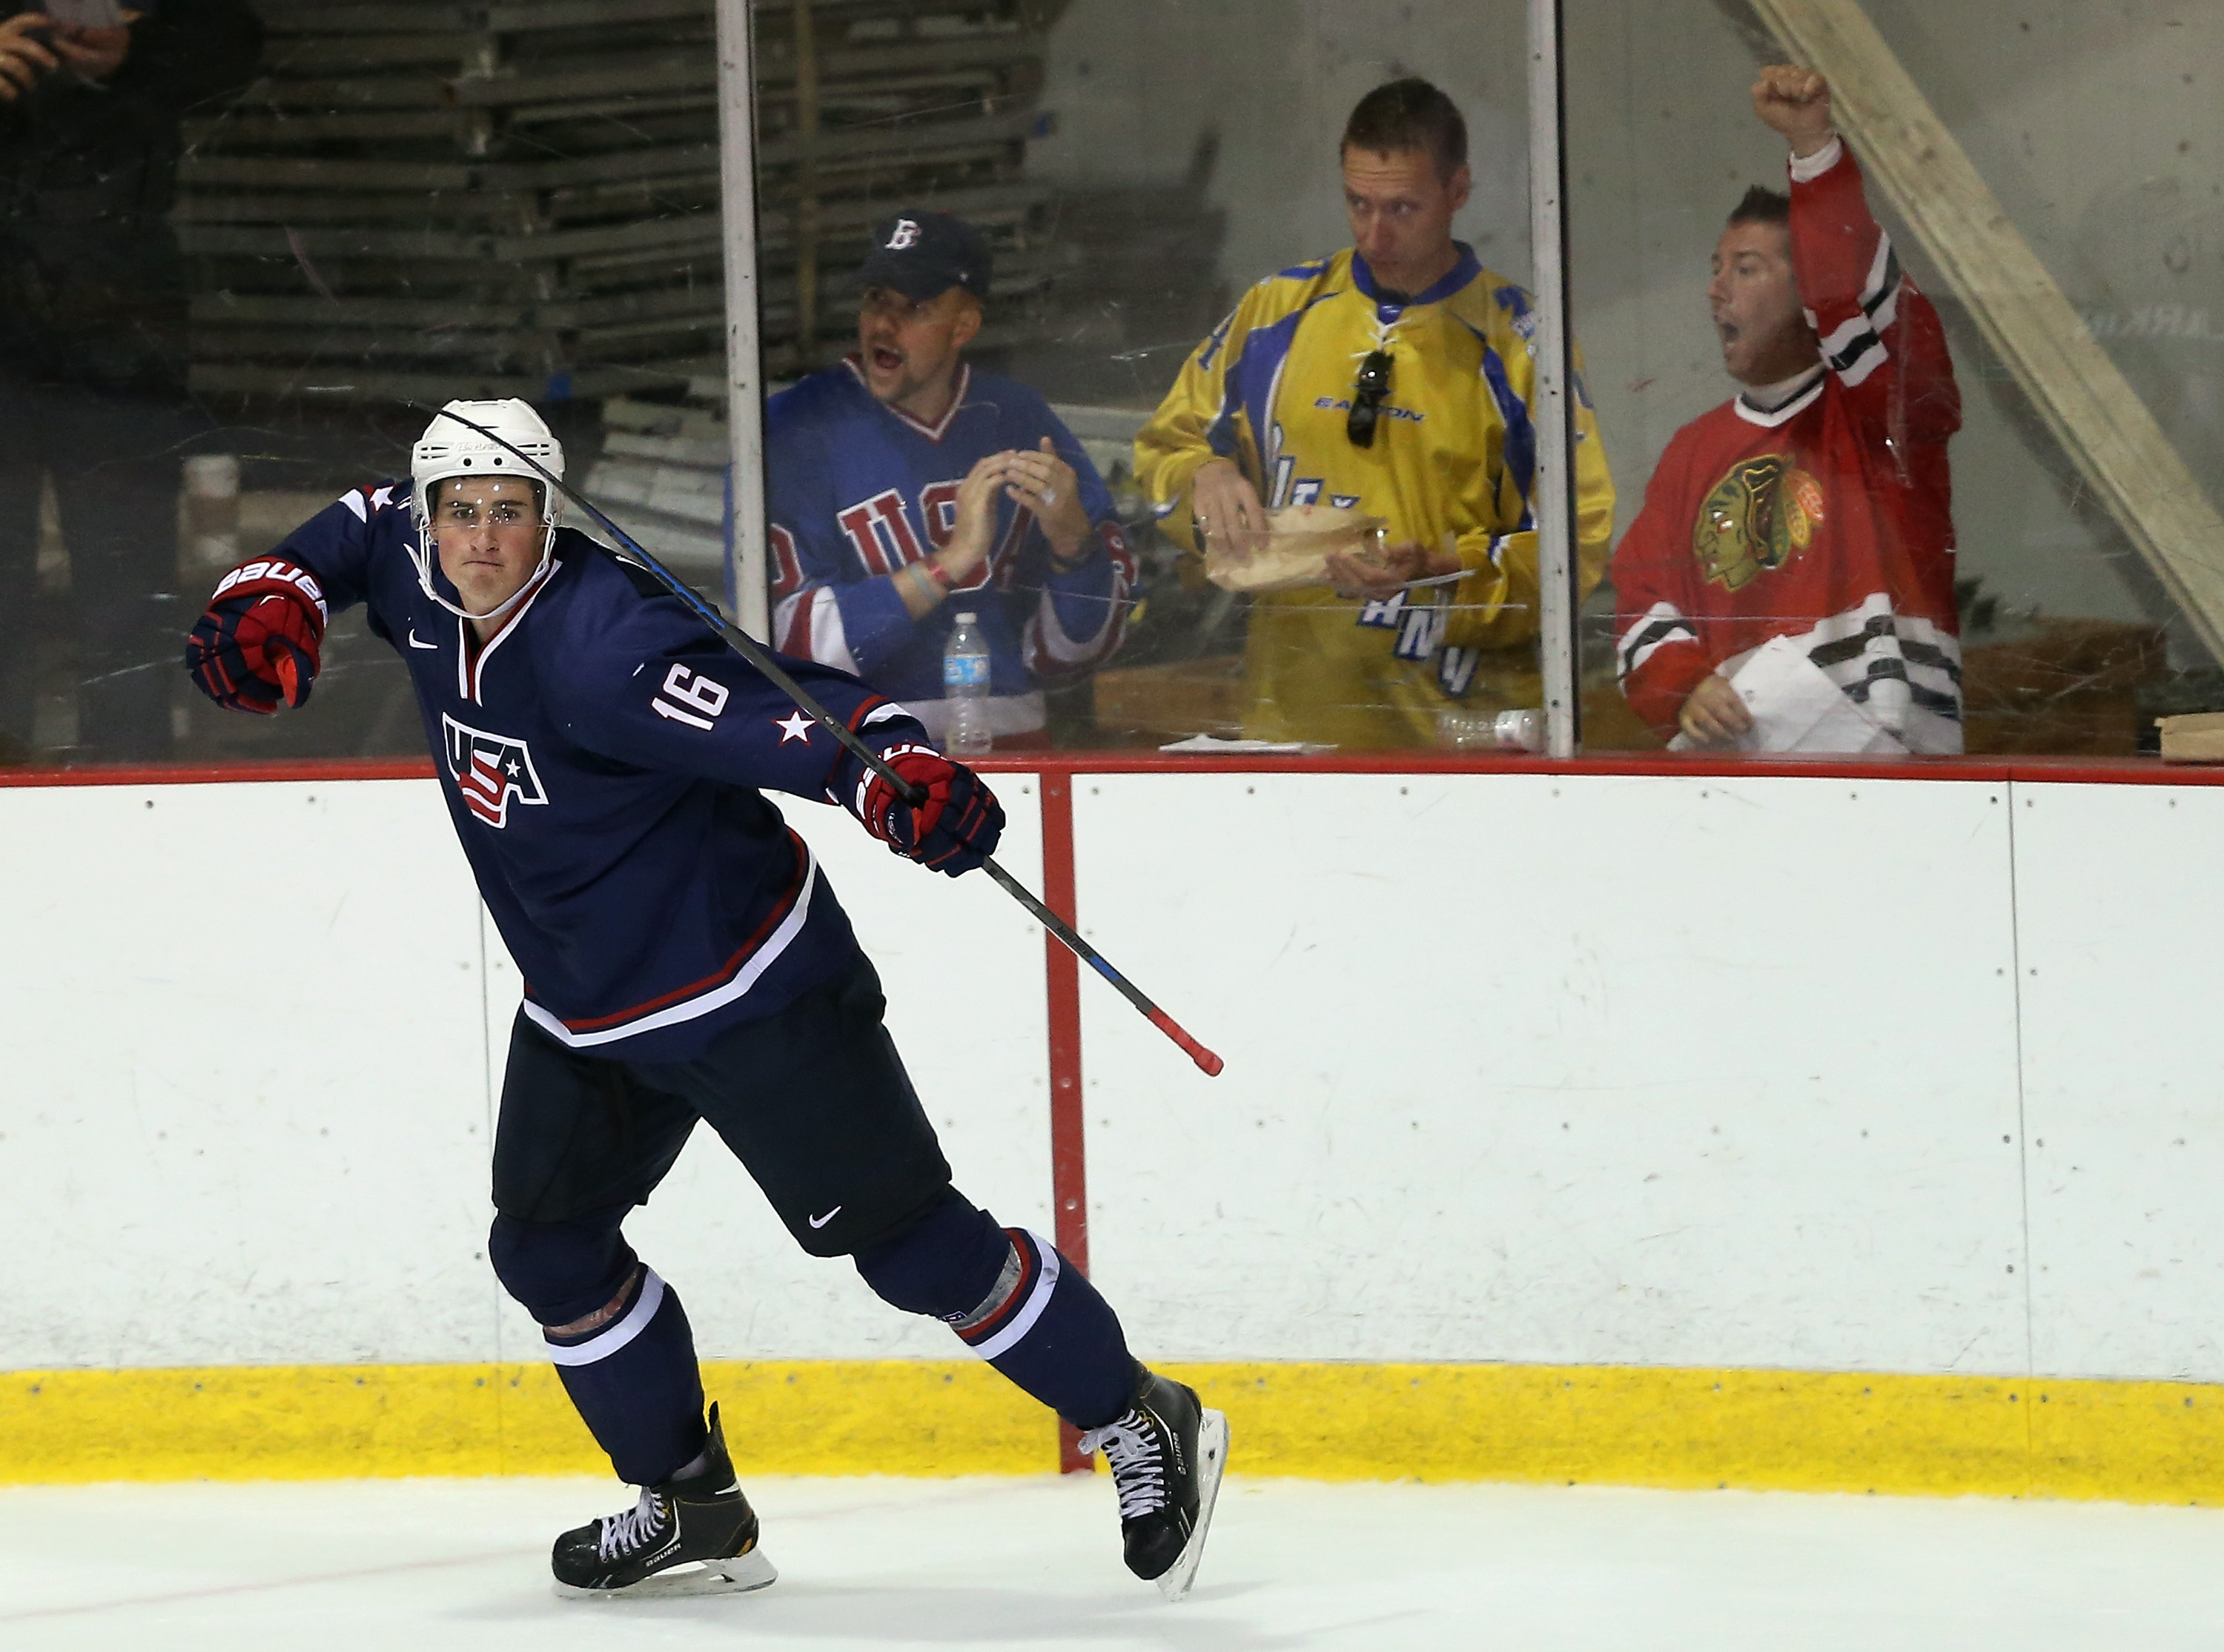 Michigan freshman and 2014 Detroit Red Wings 1st round pick Dylan Larkin was named Team USA's player of the game.